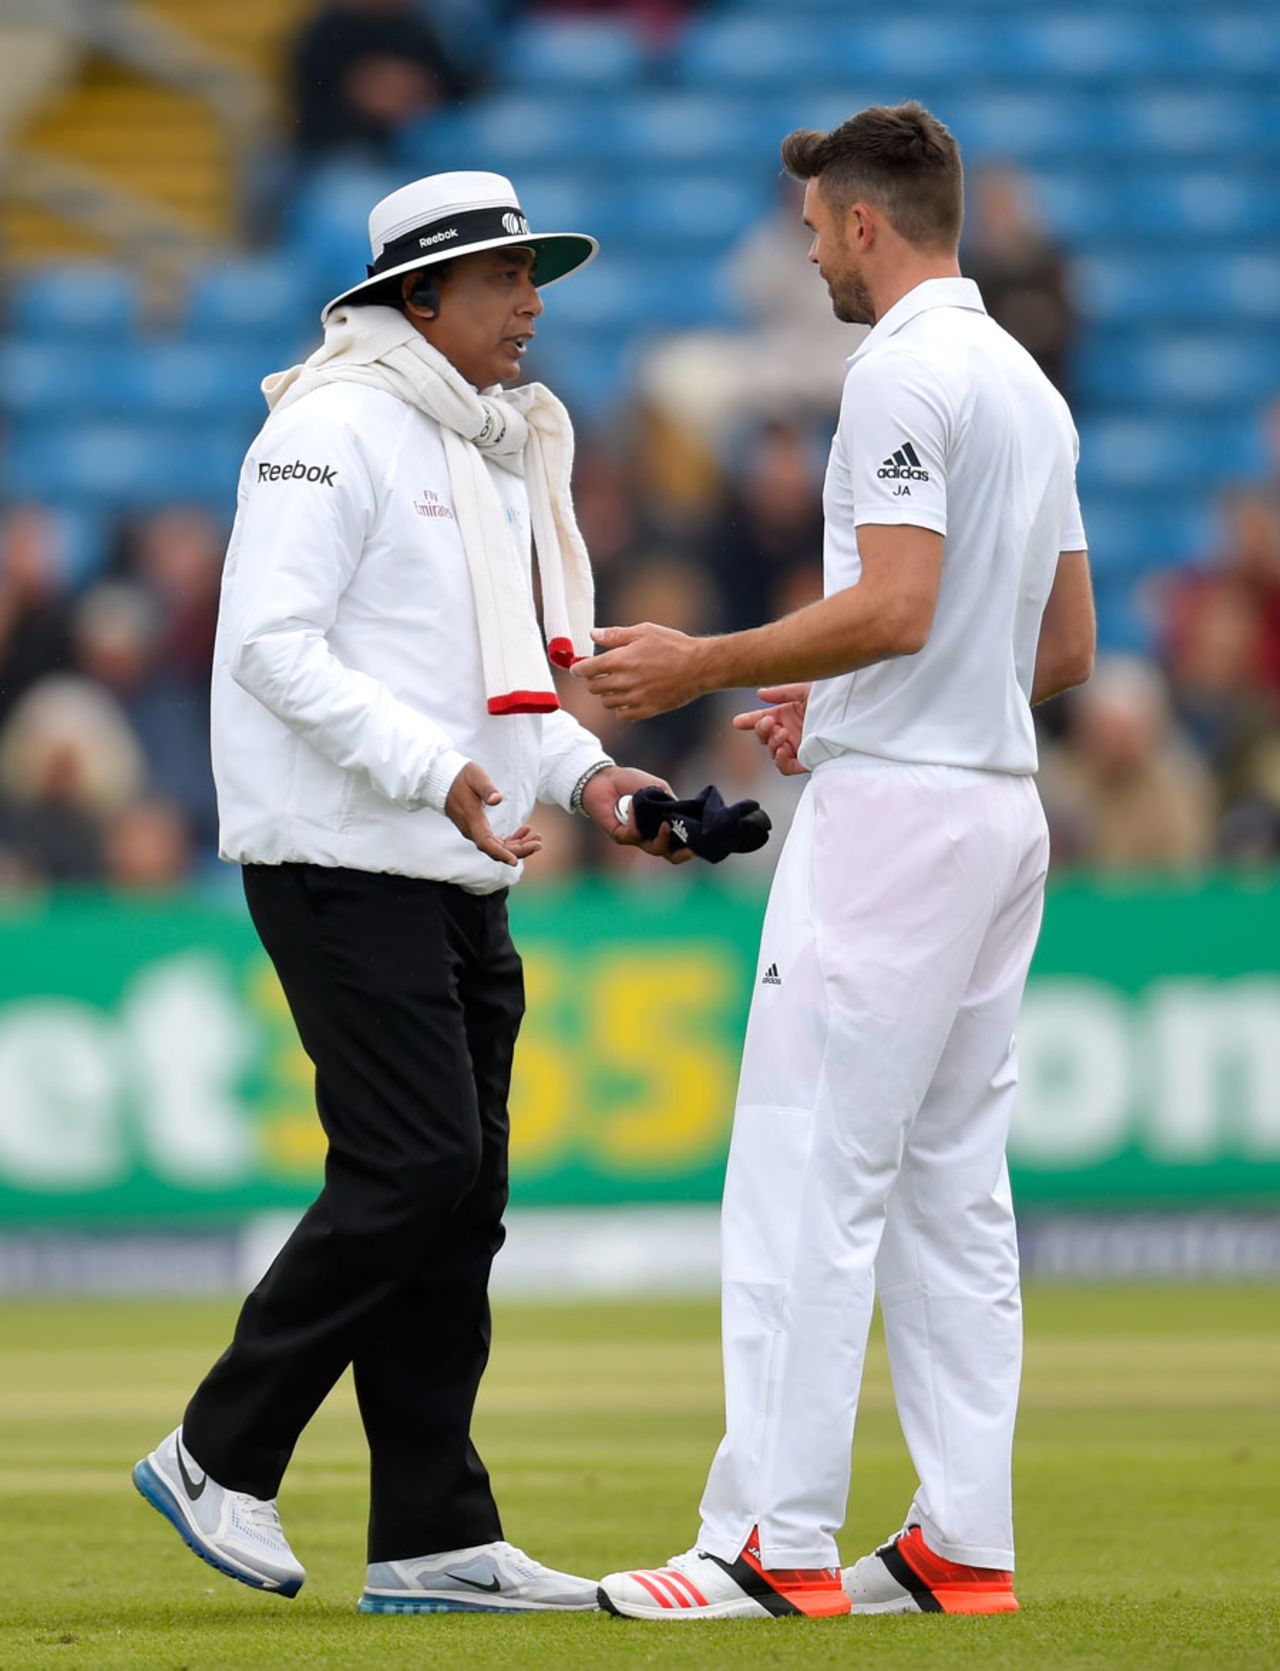 Umpire S Ravi talks to James Anderson about running on the pitch, England v New Zealand, 2nd Investec Test, Headingley, 3rd day, May 31, 2015